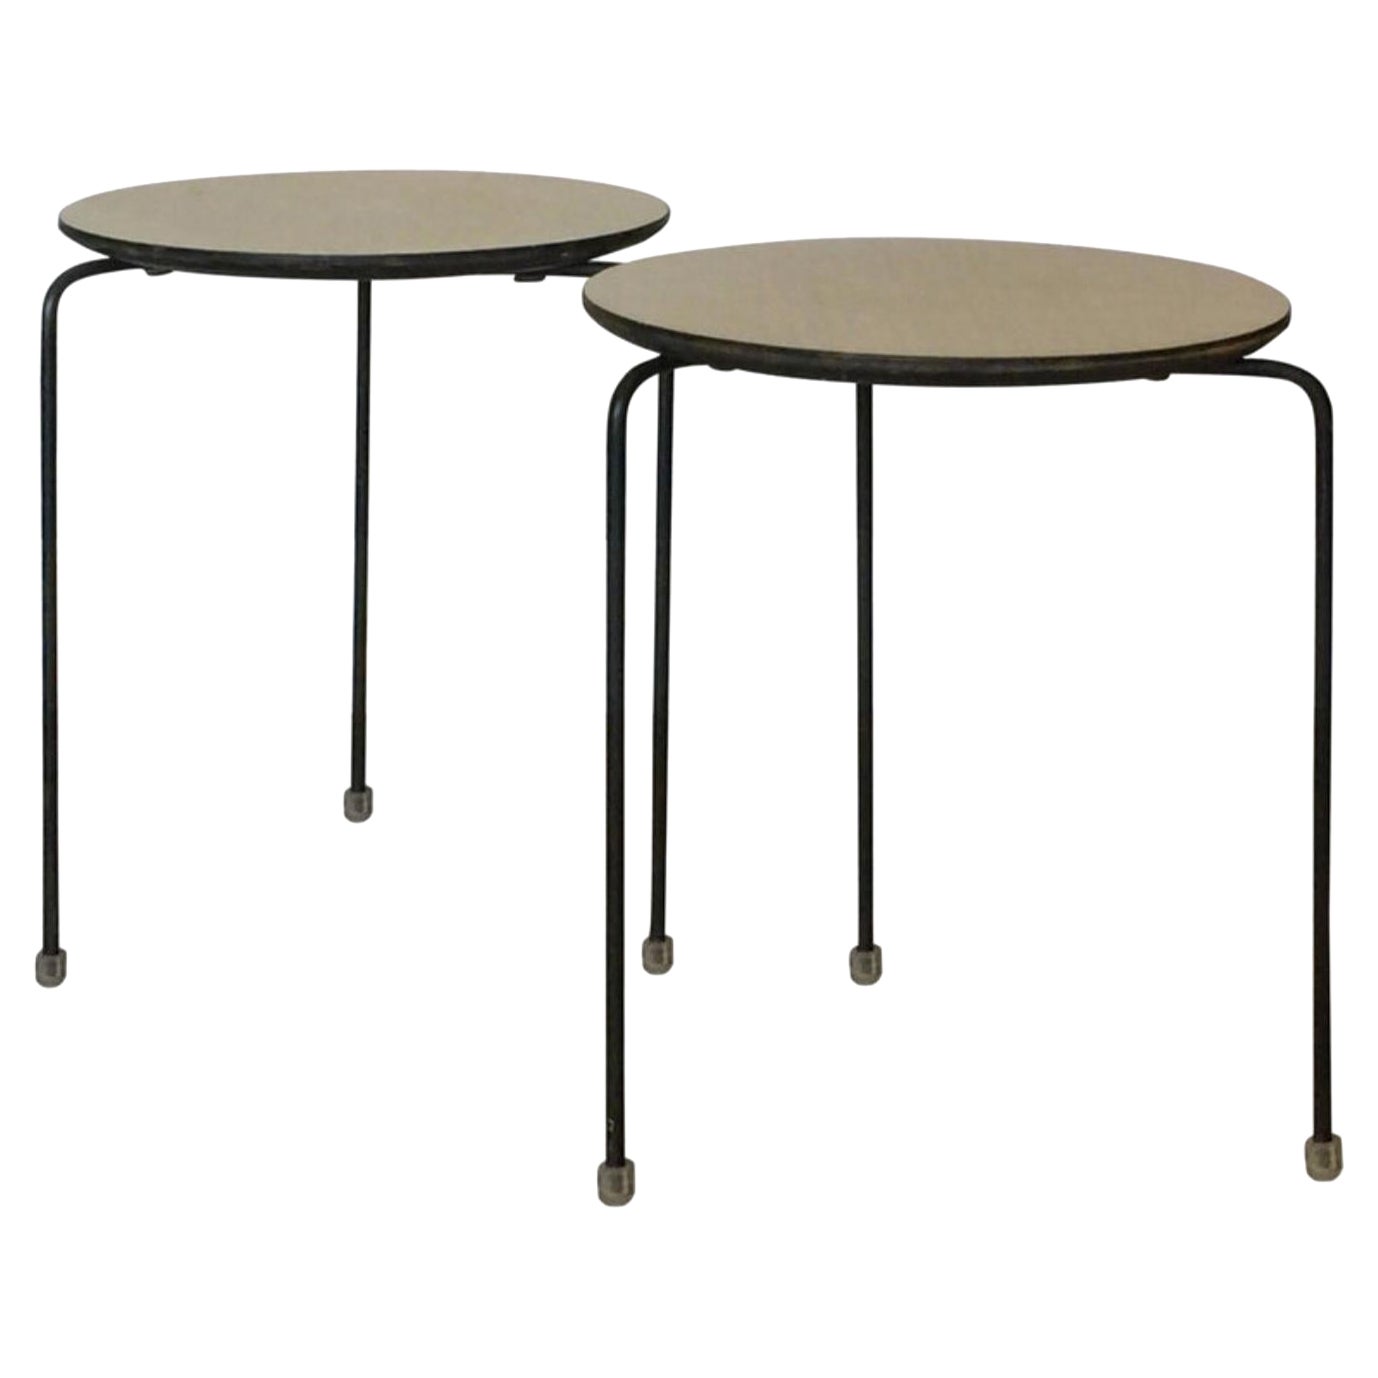 Pair of Slender Tripod Laminate Side Tables with Lucite Details